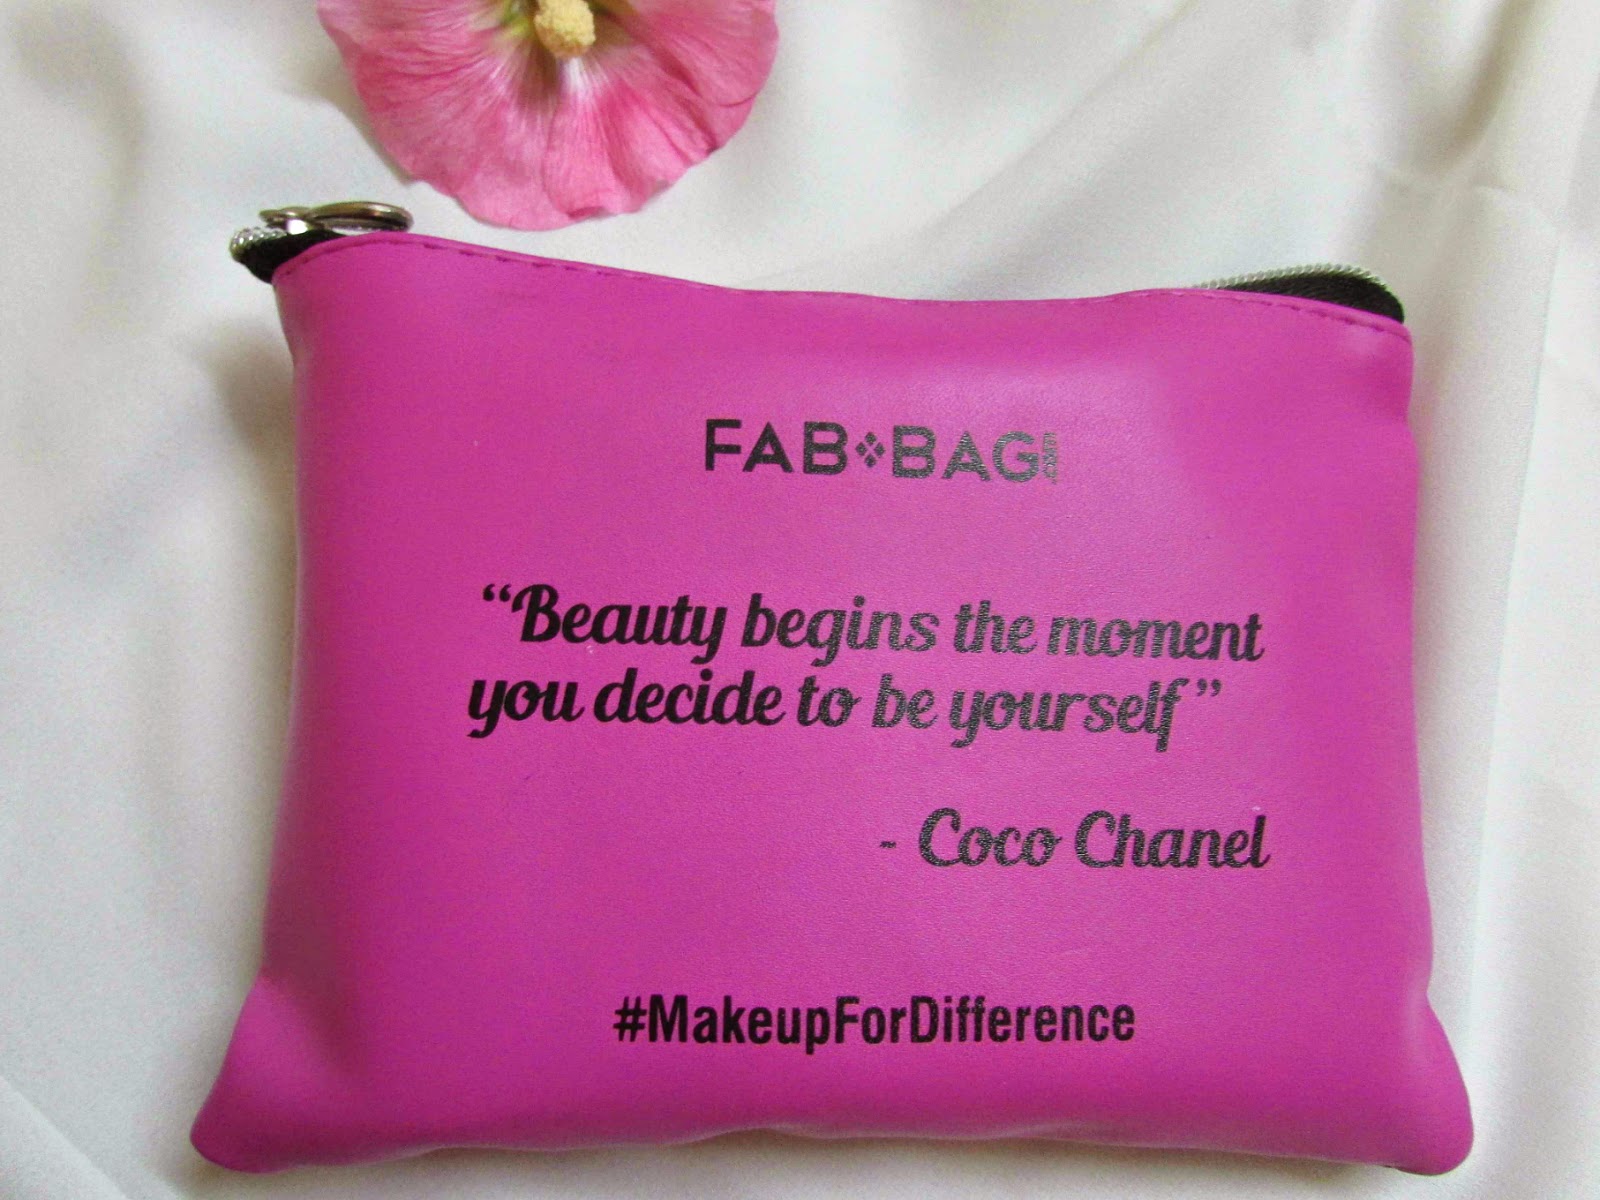 Fab Bag Dicount coupon,  Fab Bag, Fab Bag india, Fab Bag subscription, face, March Fab Bag Review, Palladio Lipstick,Soultree Colour Kohl, INVEDA BB Cream,Sabastian Volupt Spray,Fashionography Bracelet, MAKEUPFIRDIFFERENCE, beauty , fashion,beauty and fashion,beauty blog, fashion blog , indian beauty blog,indian fashion blog, beauty and fashion blog, indian beauty and fashion blog, indian bloggers, indian beauty bloggers, indian fashion bloggers,indian bloggers online, top 10 indian bloggers, top indian bloggers,top 10 fashion bloggers, indian bloggers on blogspot,home remedies, how to 